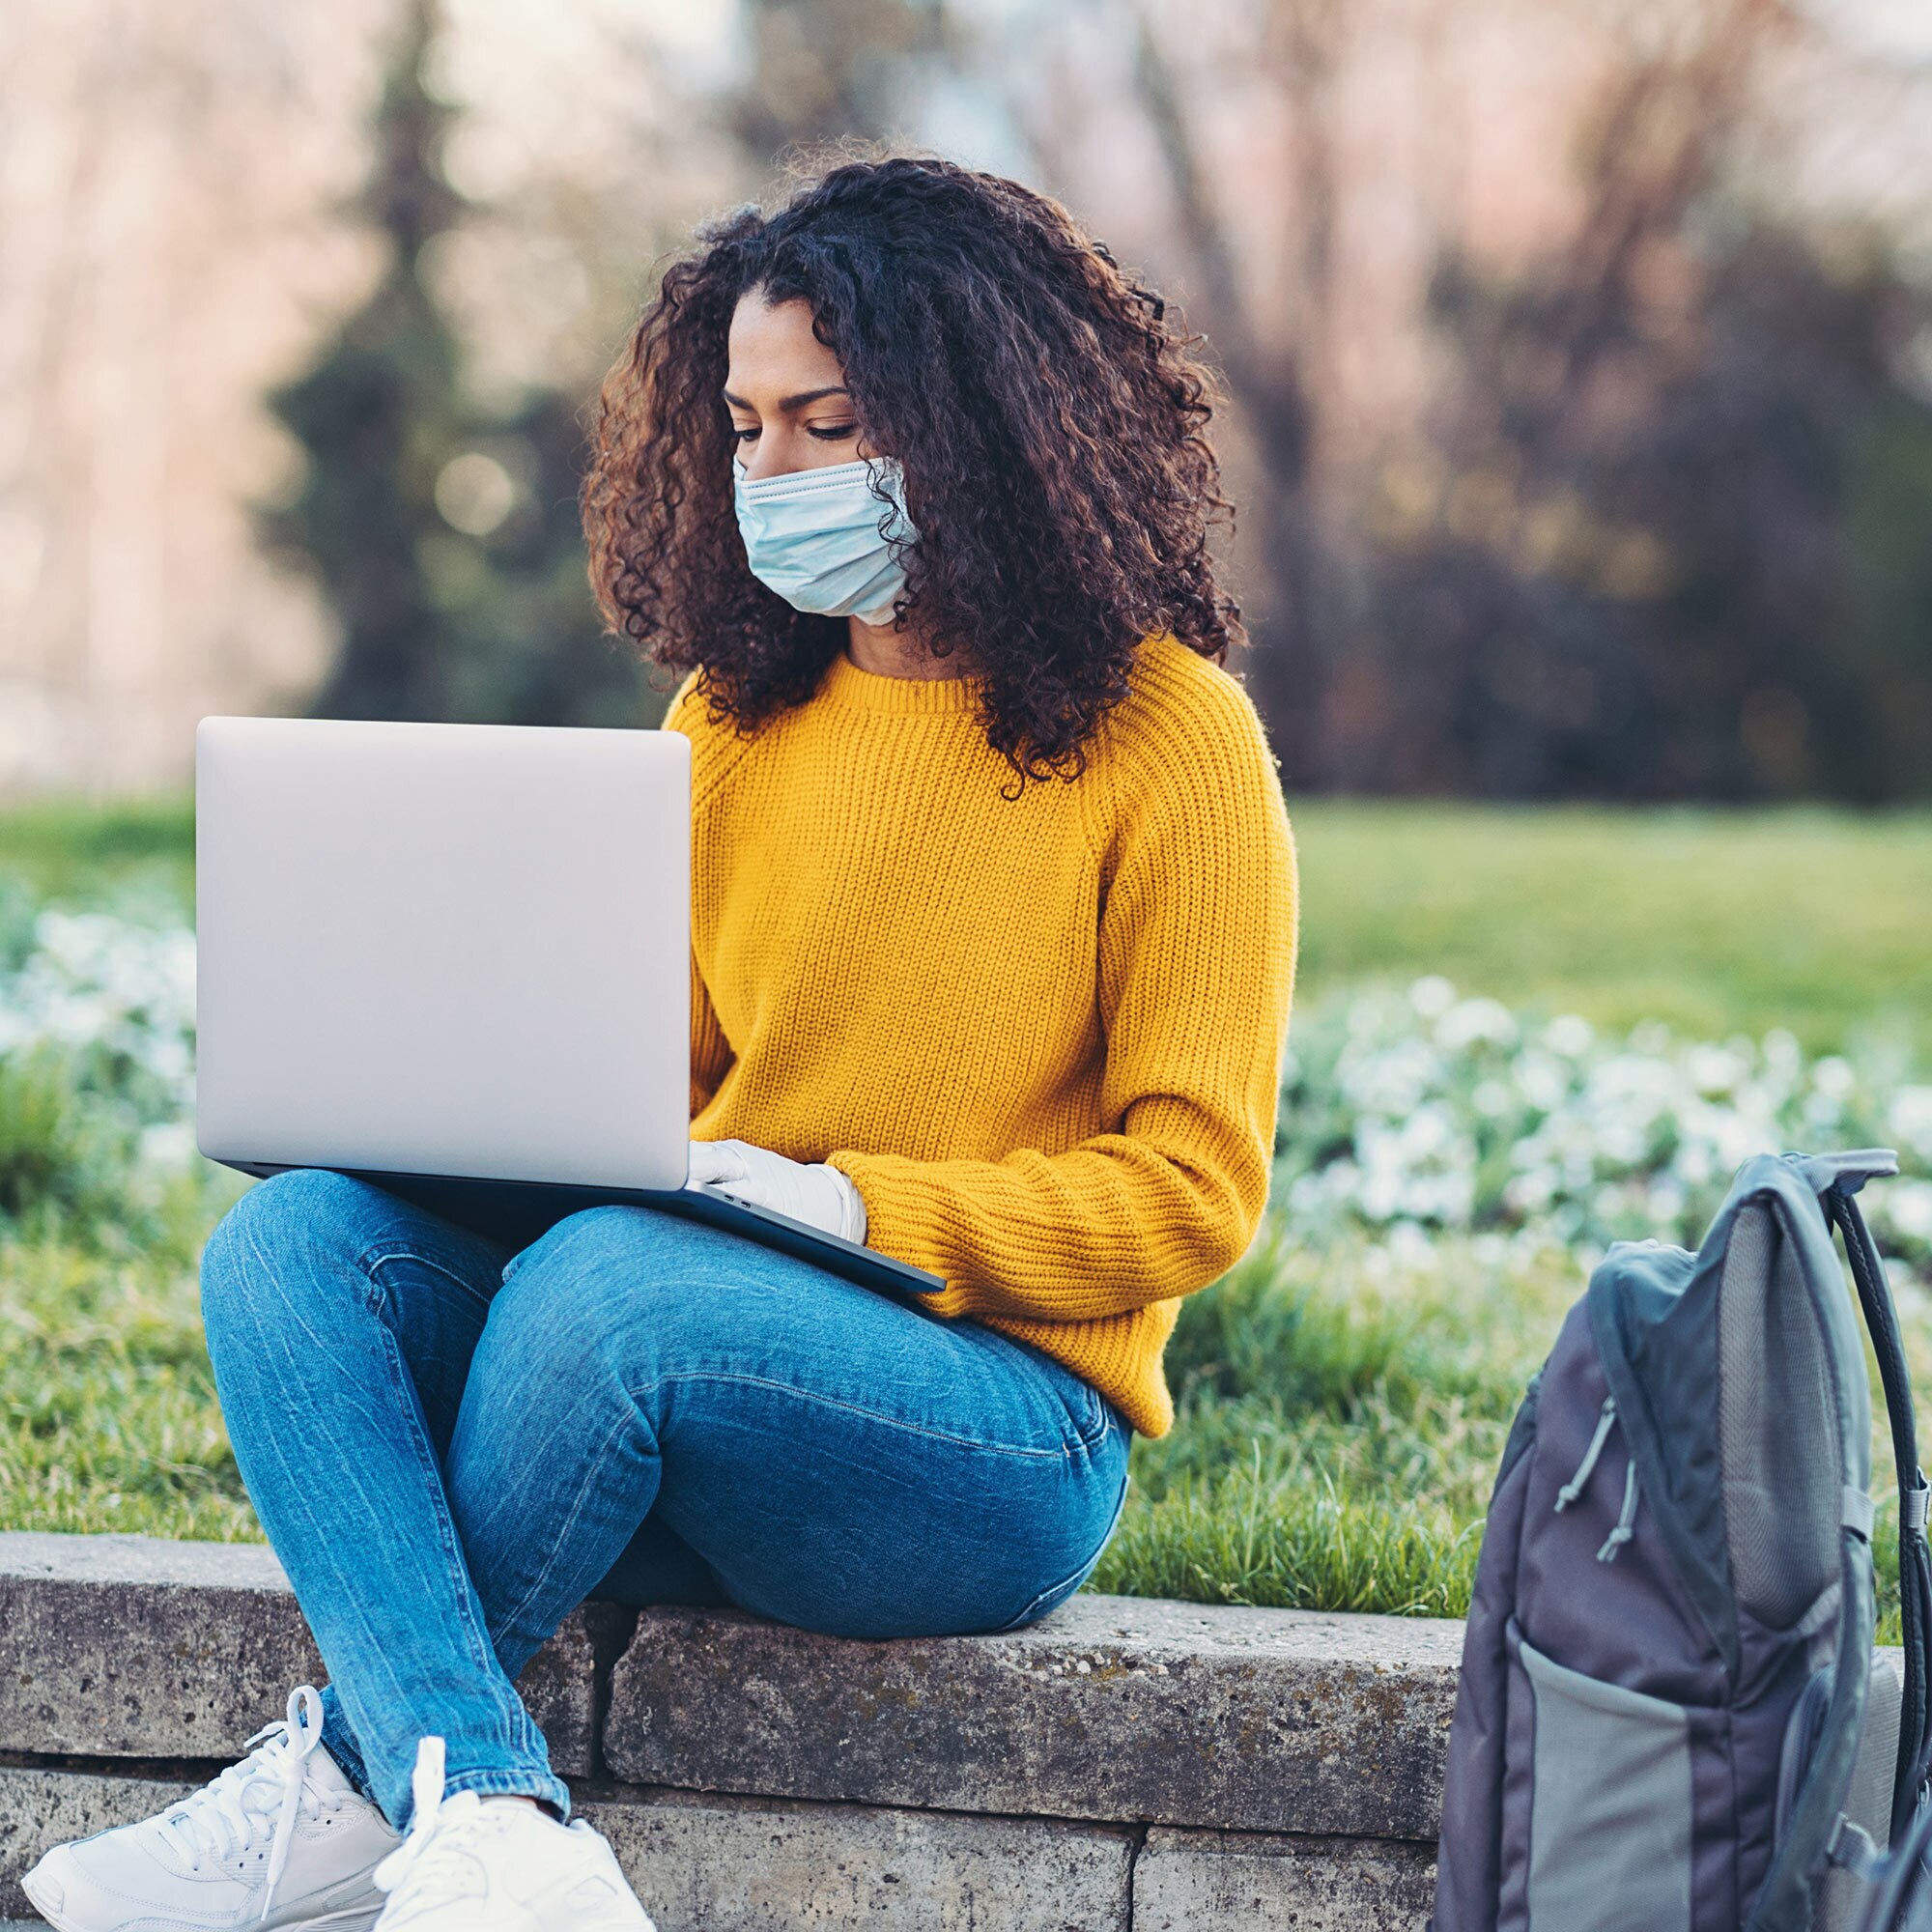 A masked woman wearing a yellow sweater sits in a park to use her laptop.